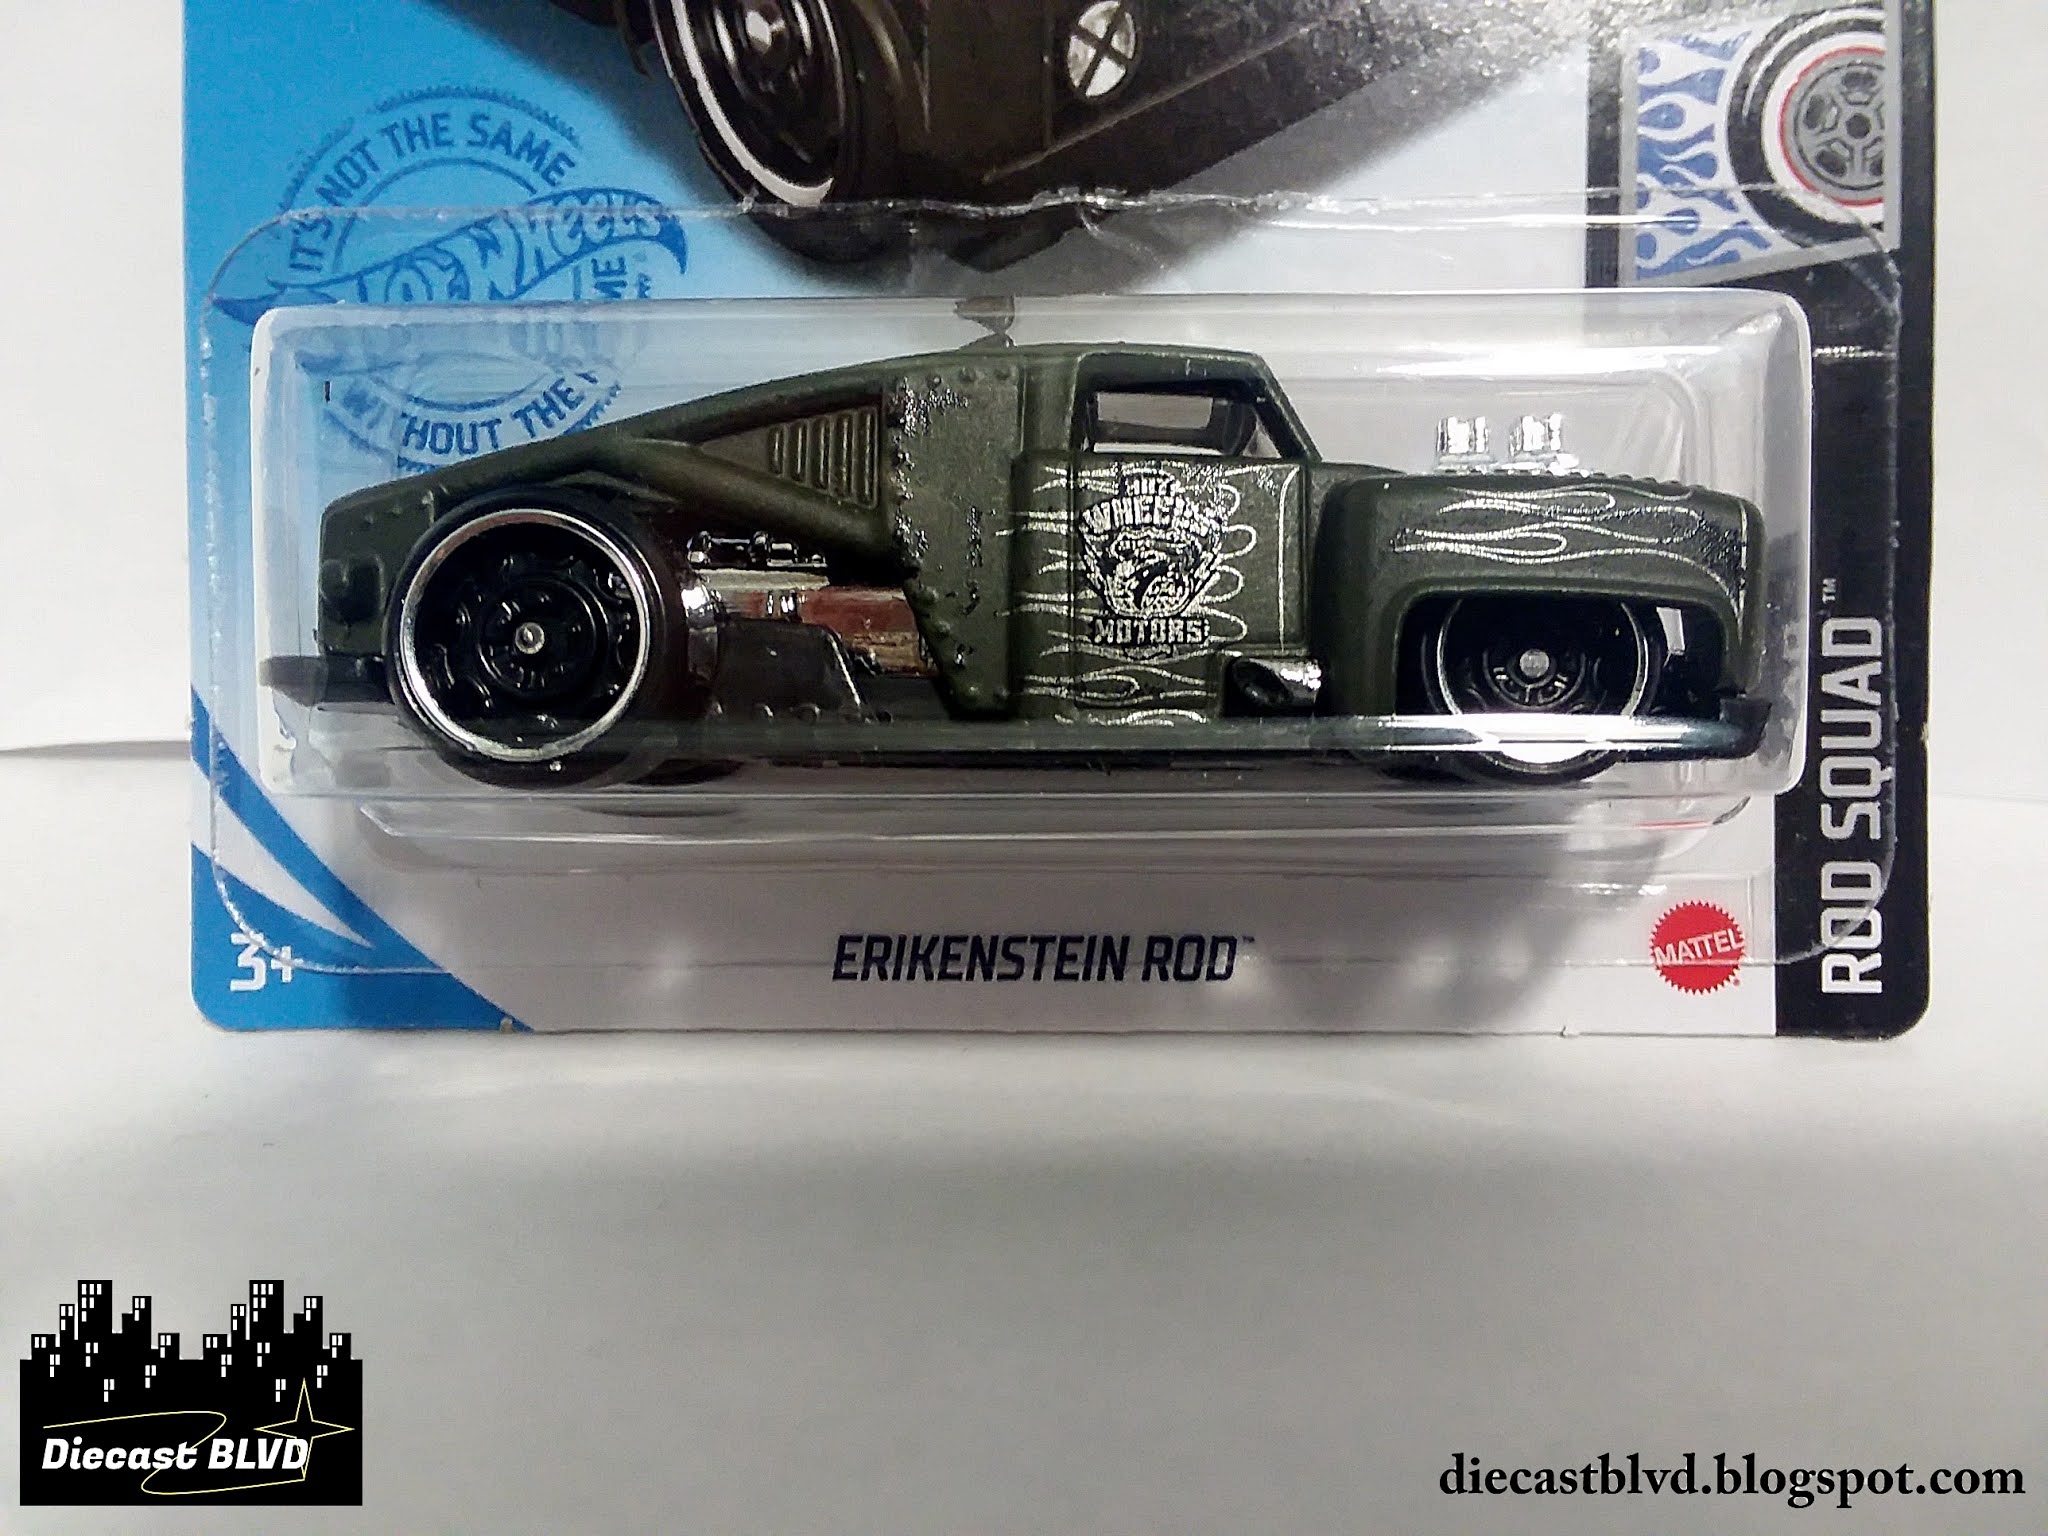 Diecast BLVD: Today On The Boulevard: Not On The Want List But Got It ...